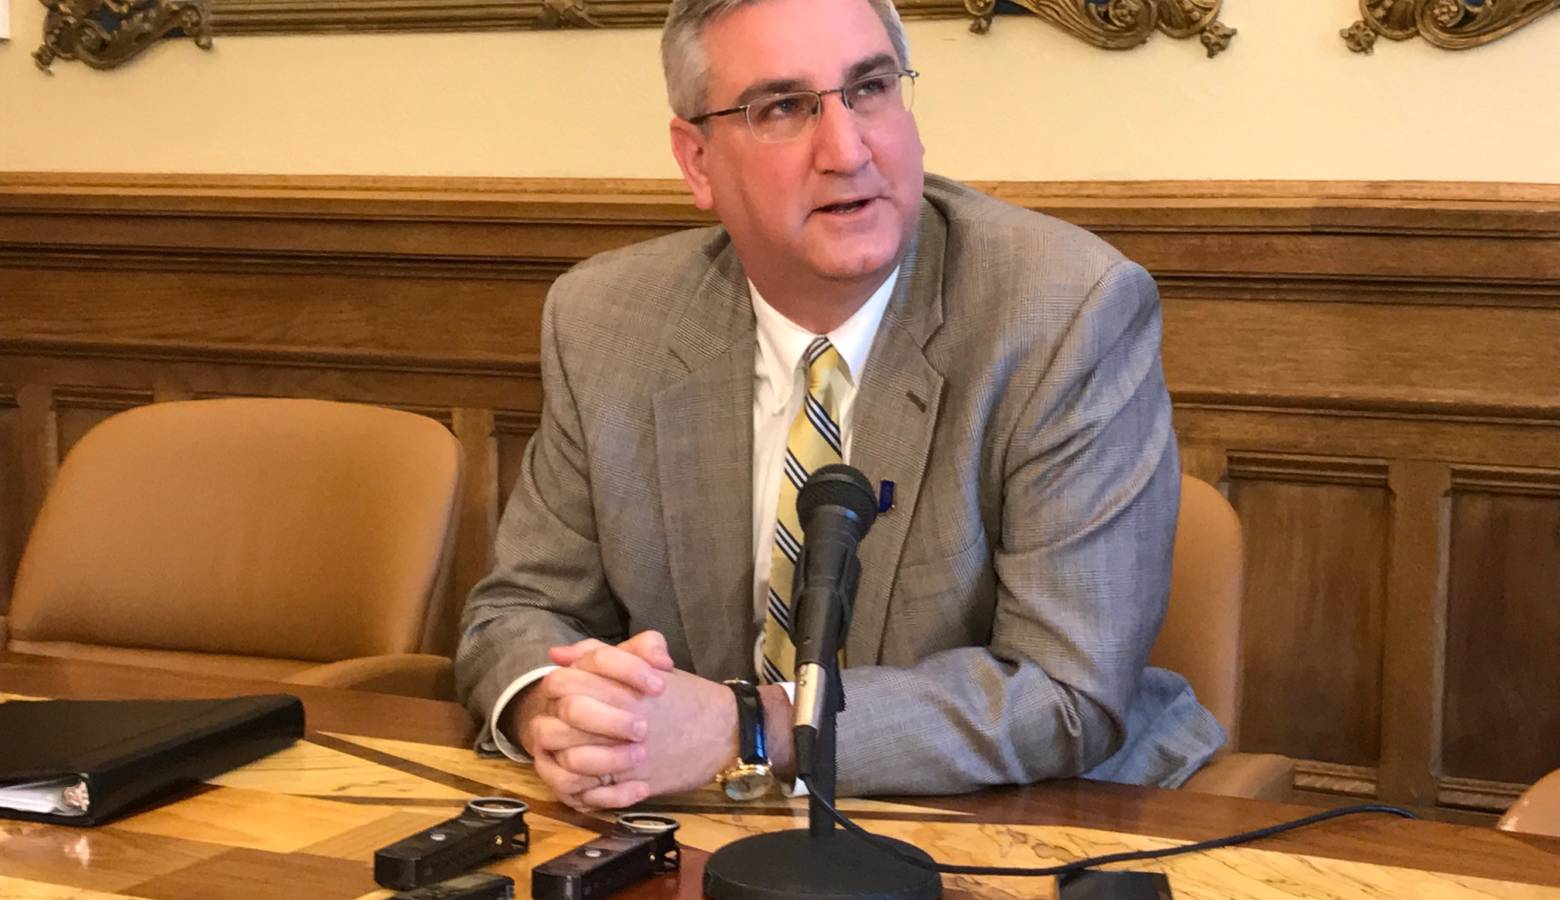 Gov. Eric Holcomb says the abortion reporting requirements bill does not restrict access to abortion. (Brandon Smith/IPB News)